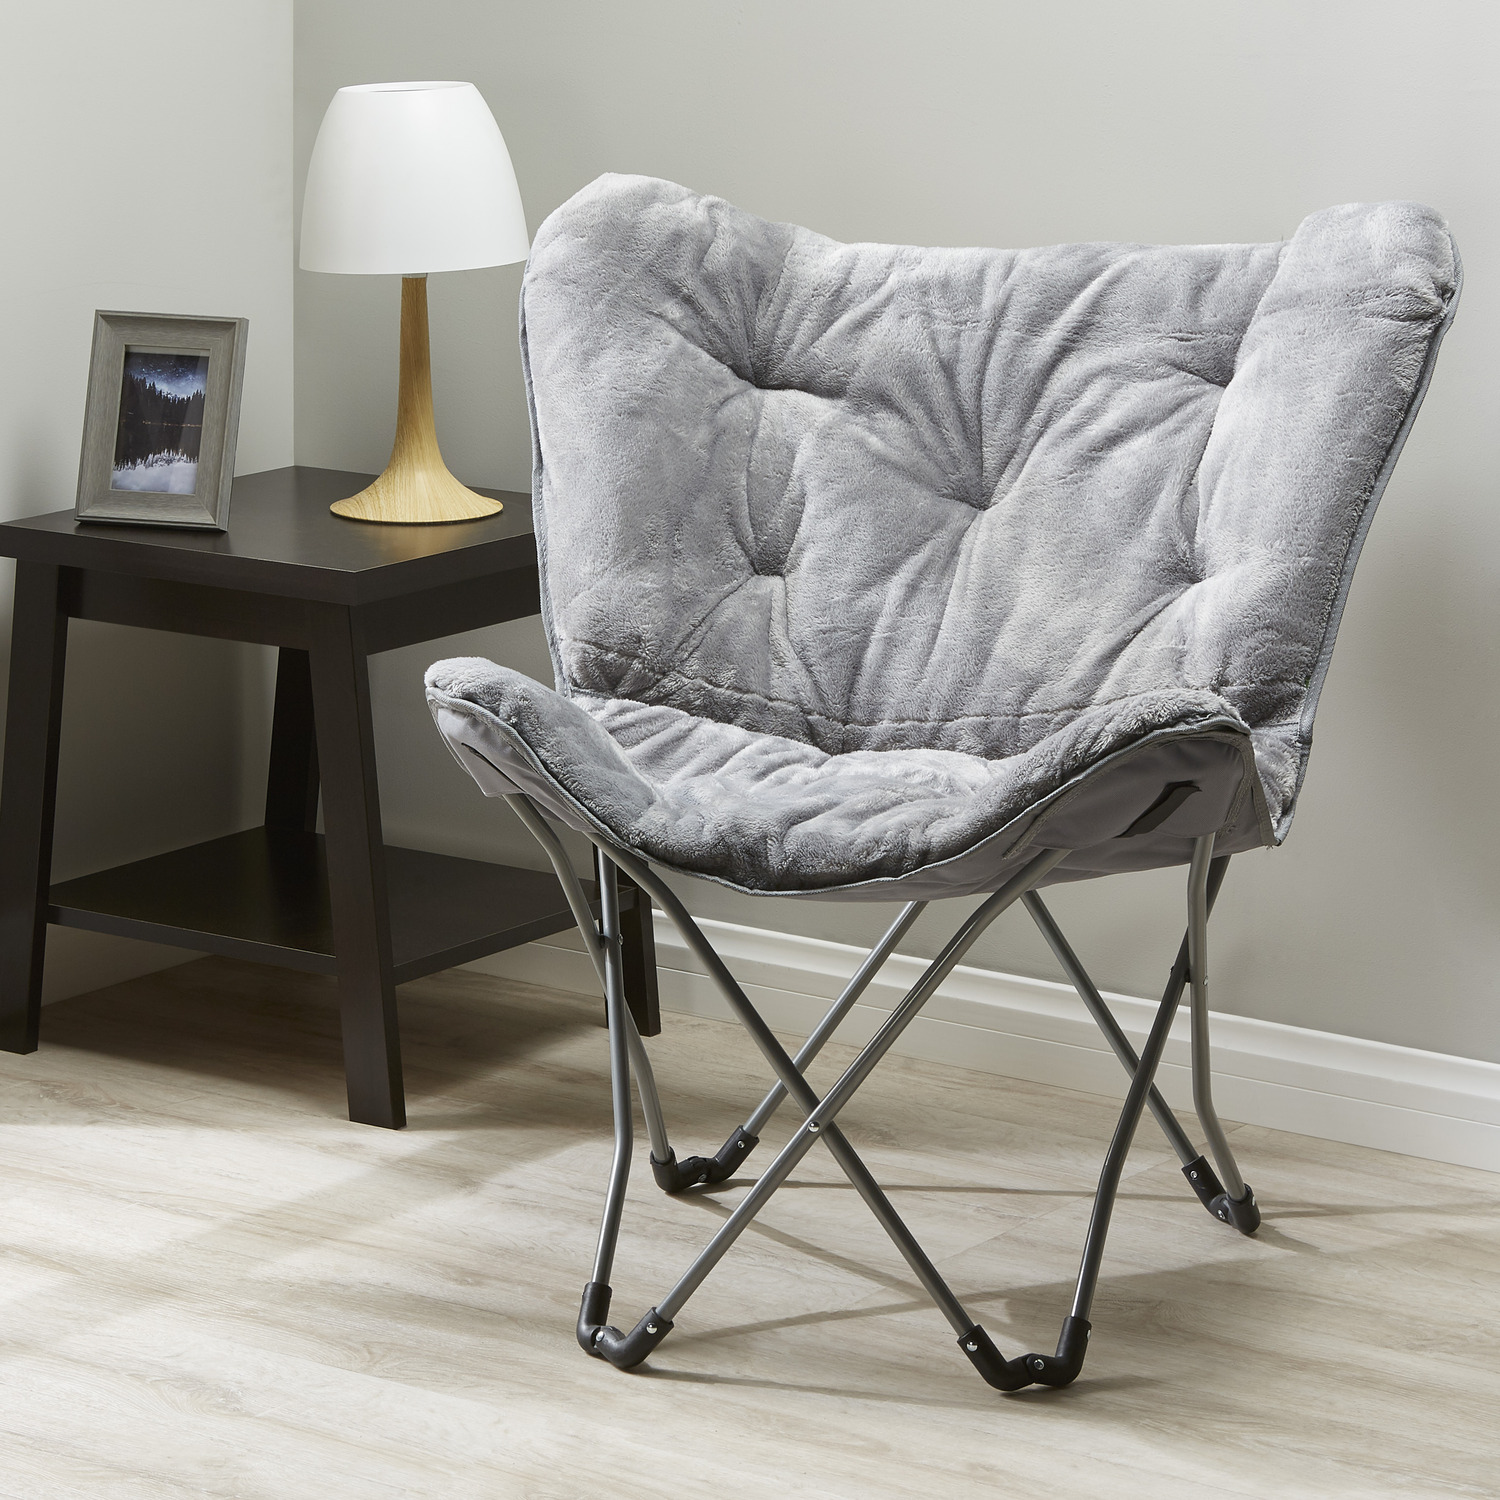 Mainstays Folding Butterfly Chair, GRAY, NEW